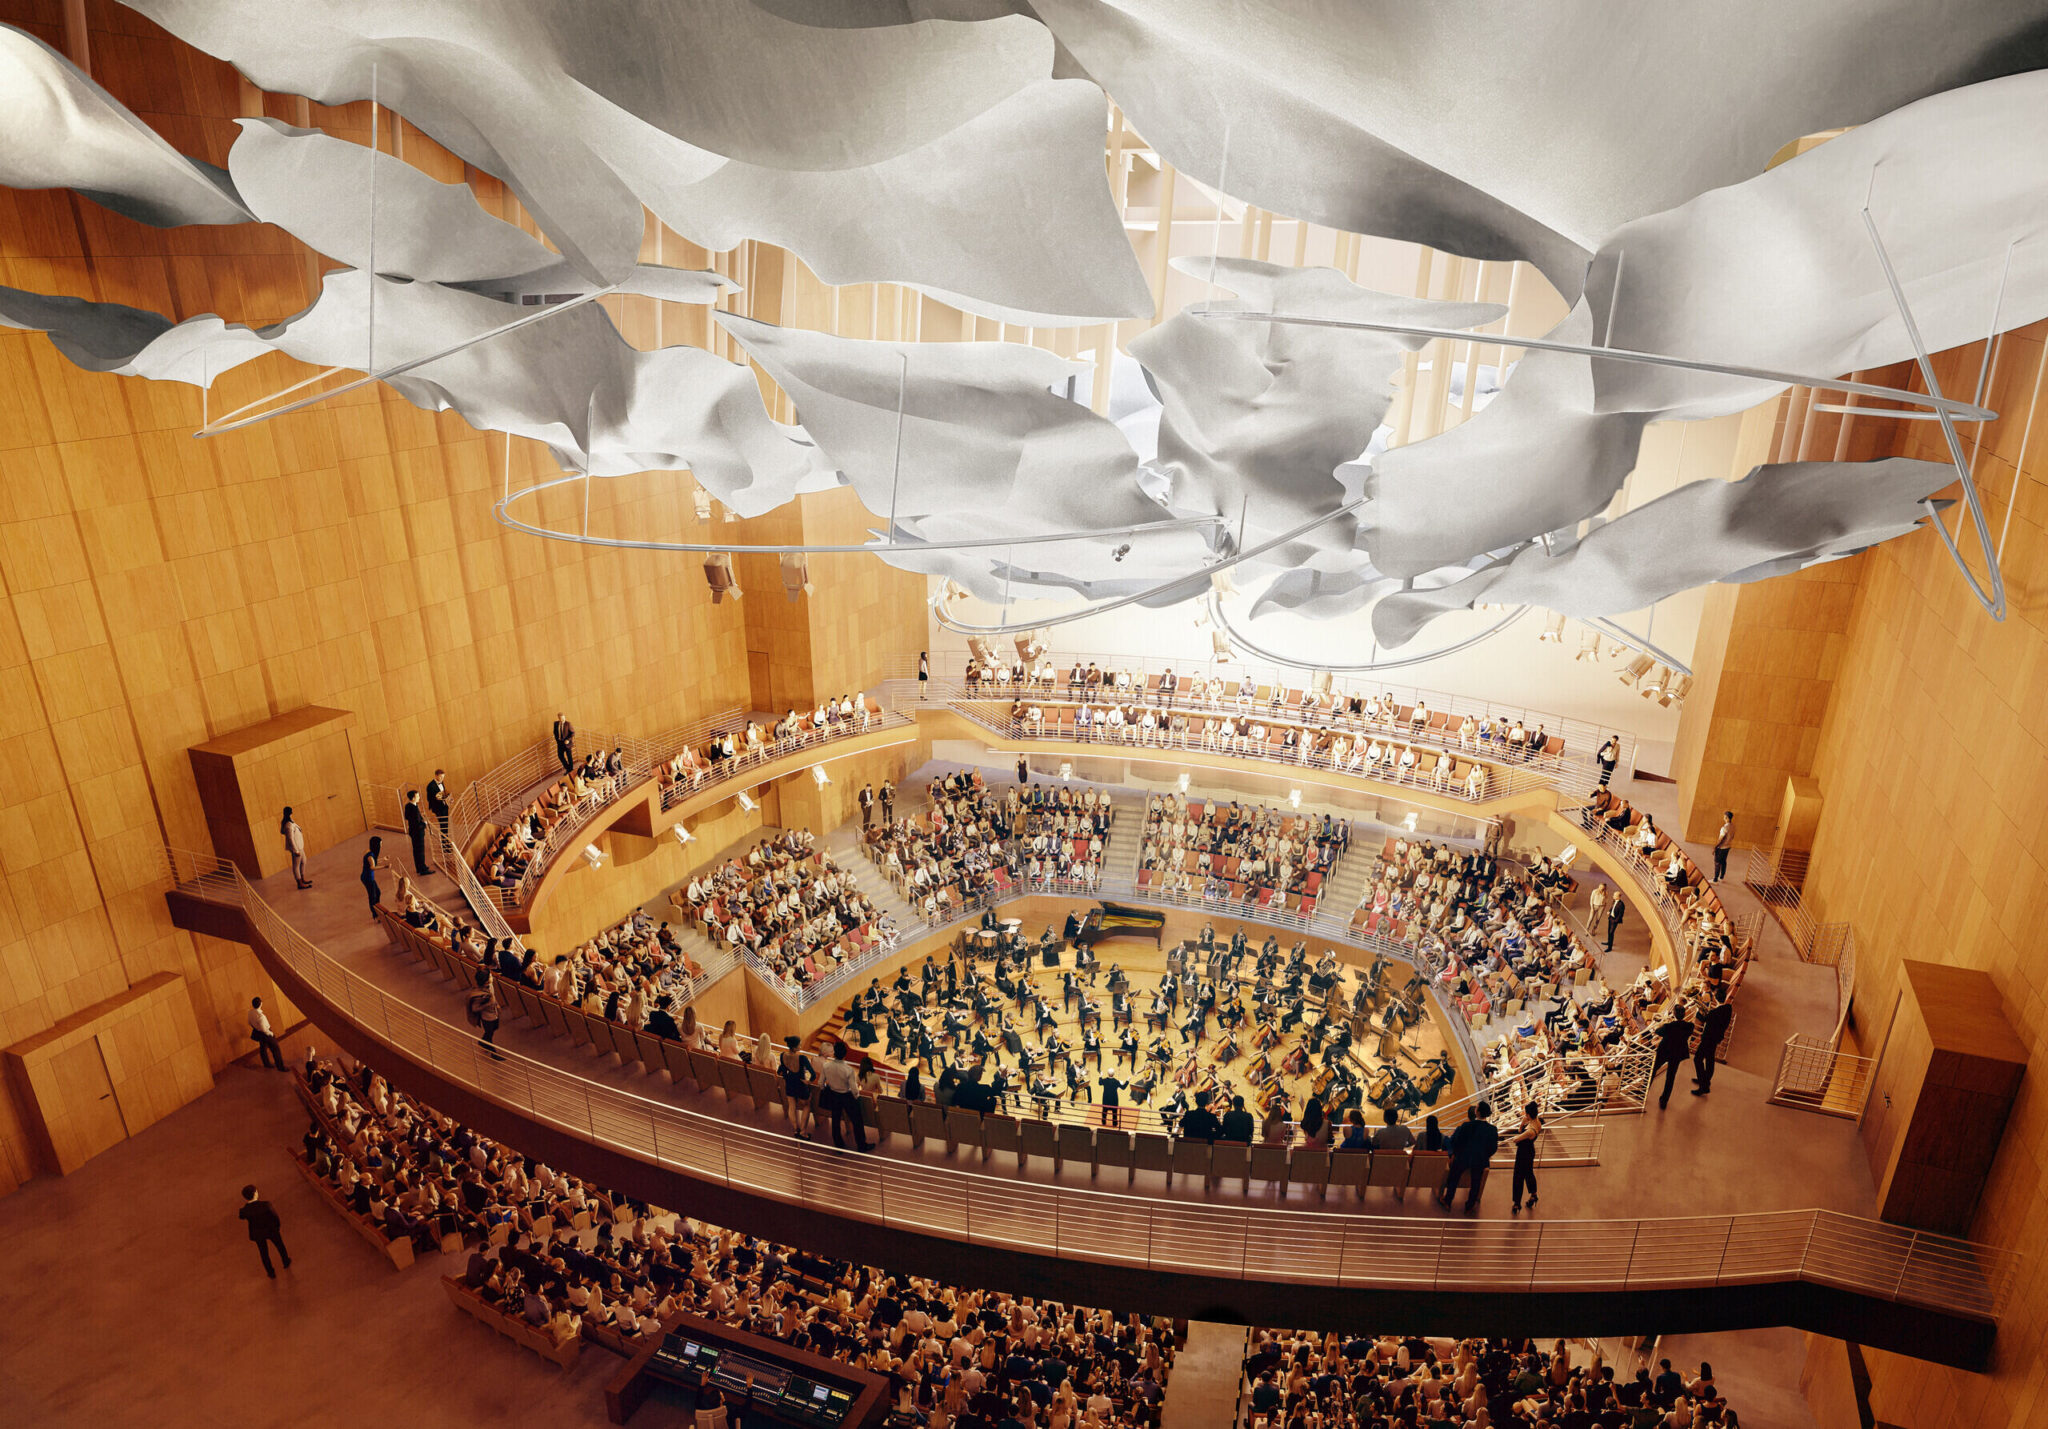 Rendering of the Colburn Center at the Colburn School. Interior of 1,000-seat concert hall named for Terri and Jerry Kohl located on the West end of the project site. Courtesy Frank O. Gehry & Gehry Partners, LLP